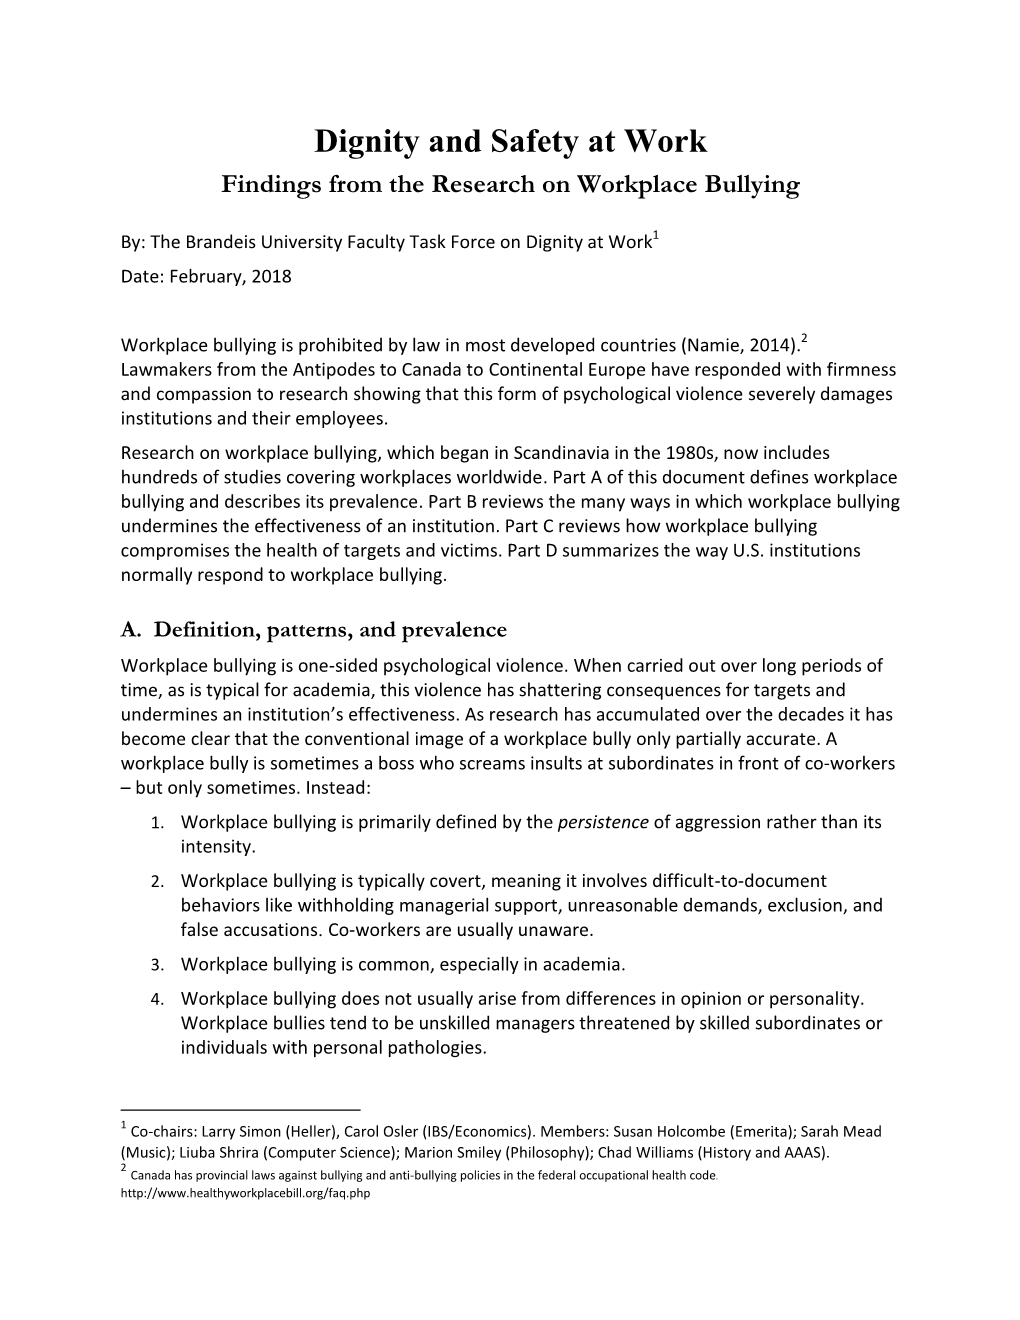 Task Force Literature Survey of Research on Workplace Bullying (Pdf)